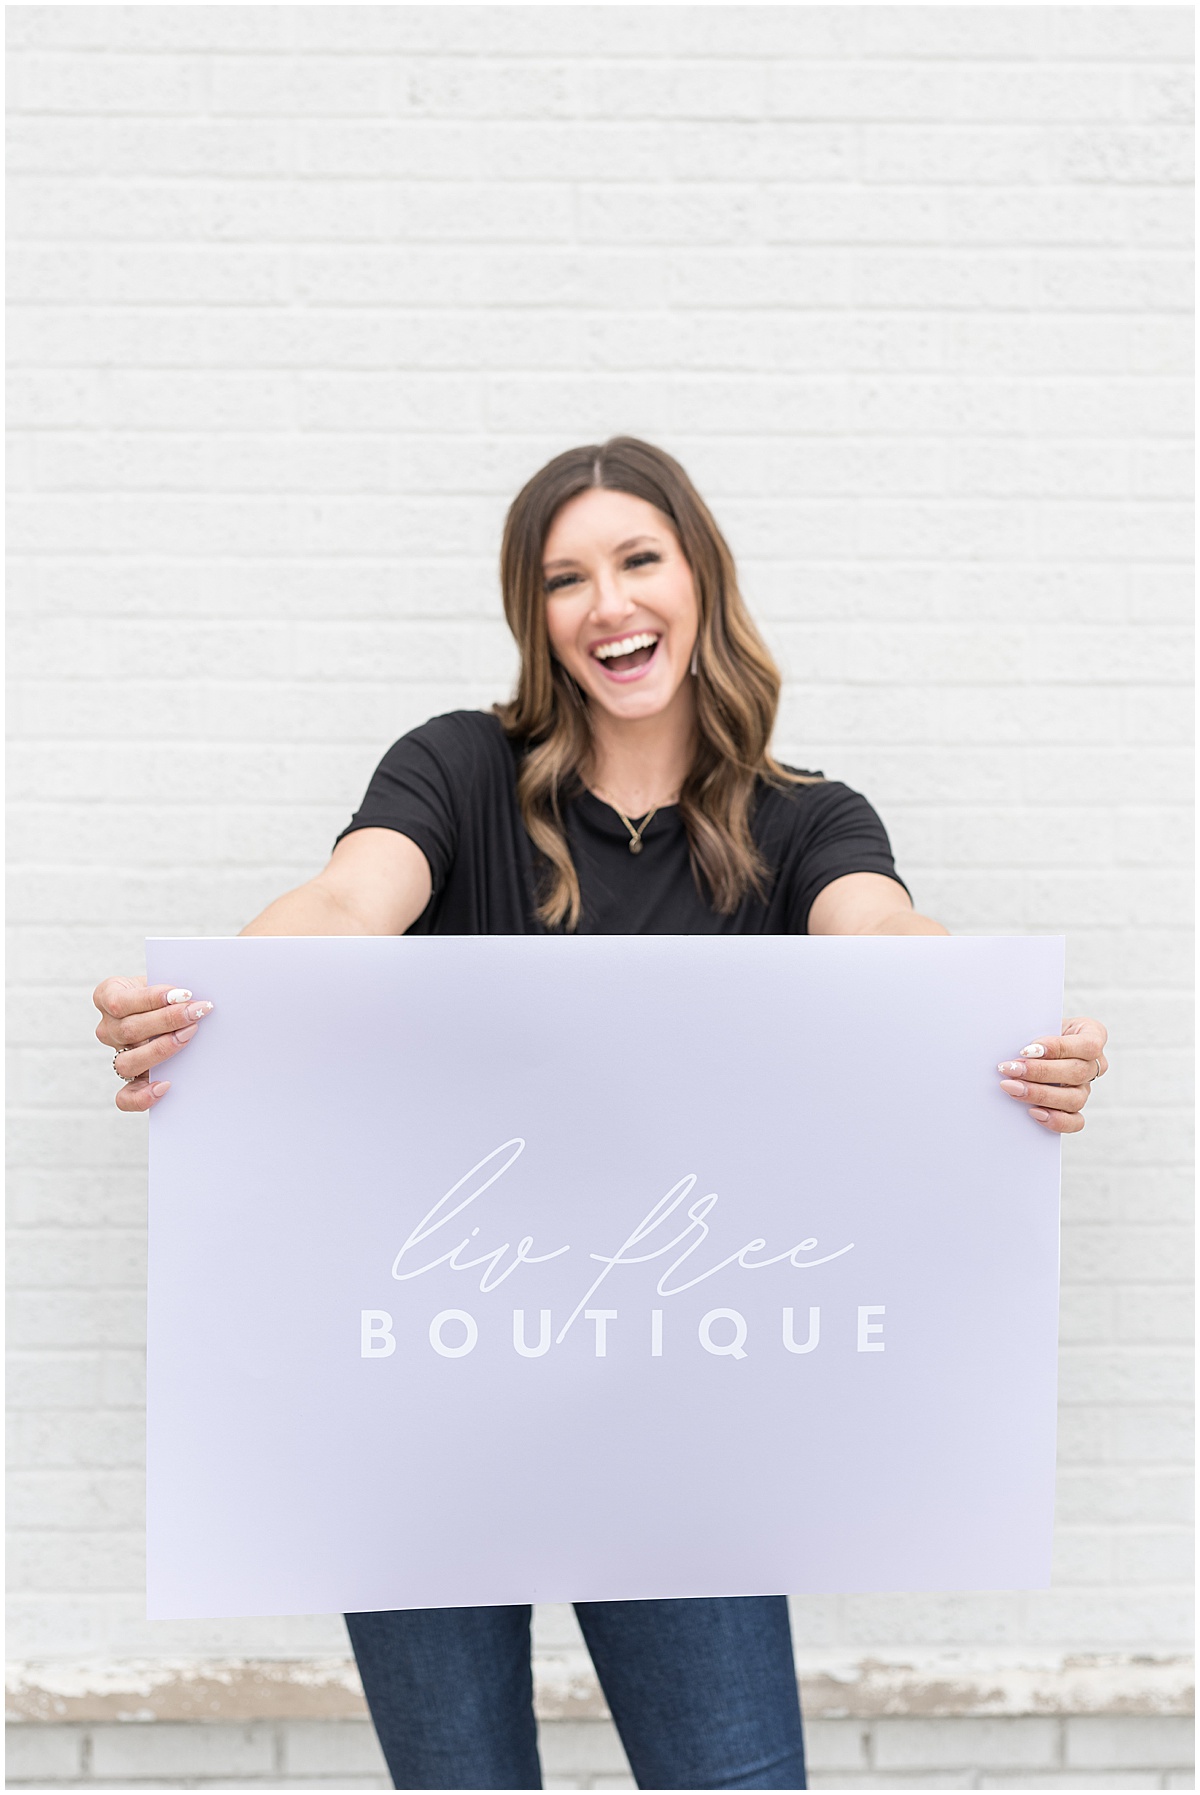 Boutique branding photos in Lafayette, Indiana for Liv Free Boutique